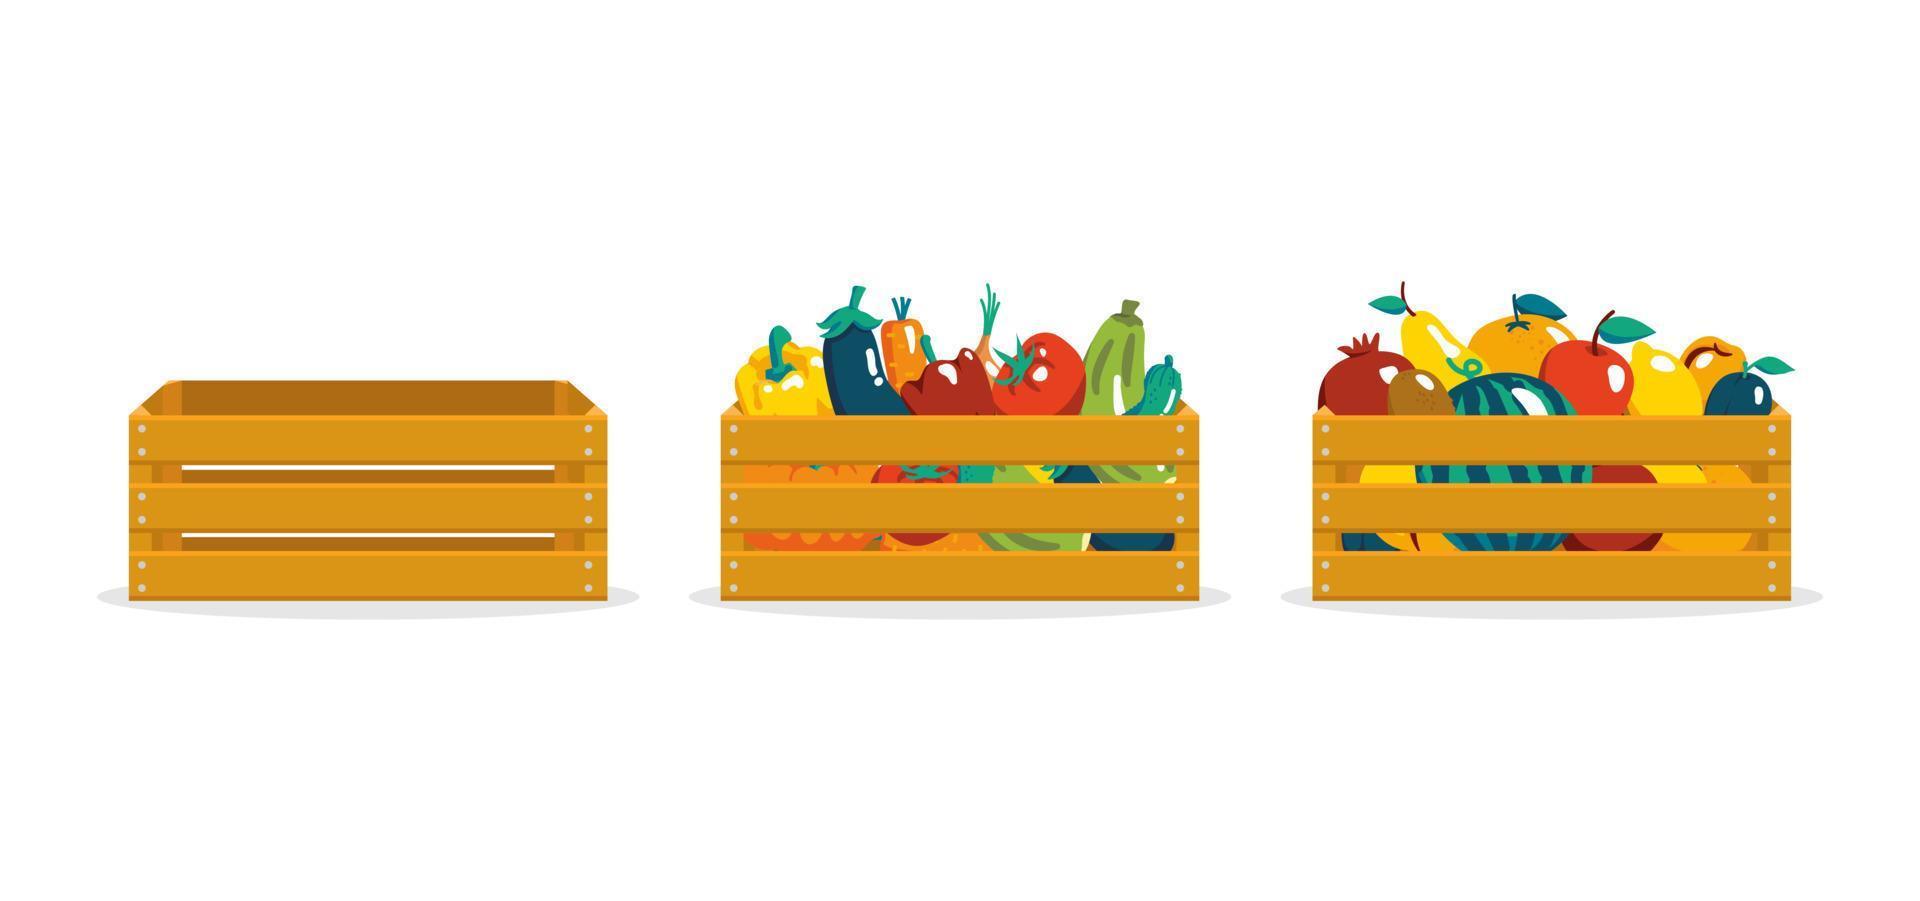 Autumn harvest. fresh fruits and vegetables in a wooden box. The concept of the harvest festival. flat vector illustration, isolated on white background